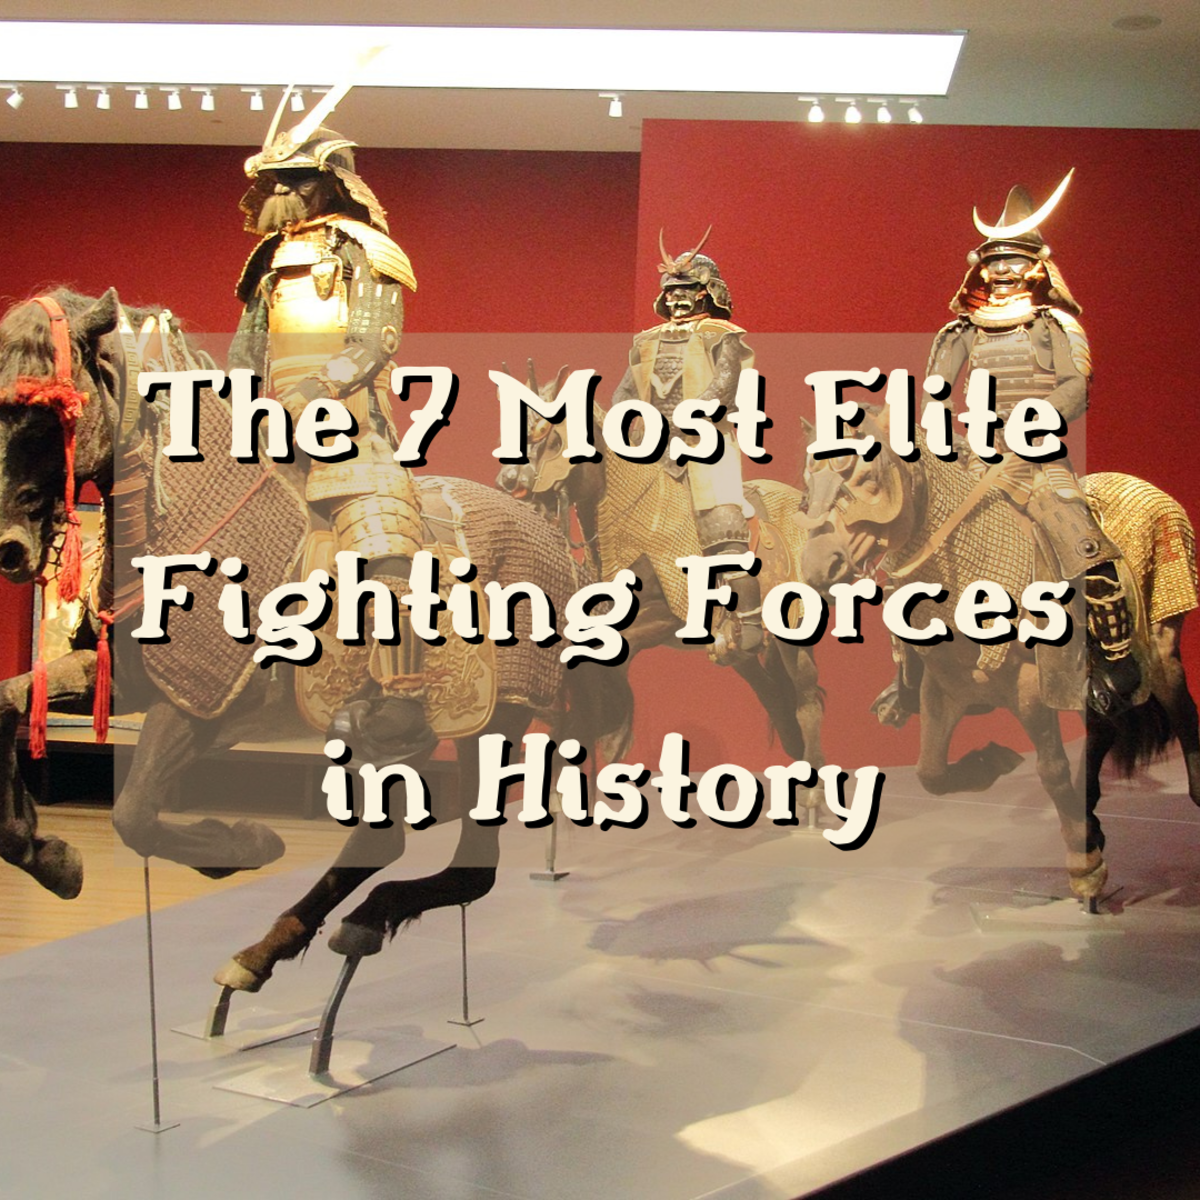 Read on to learn about 7 of the most elite fighting forces in history. Depicted above all the legendary samurai on horseback.